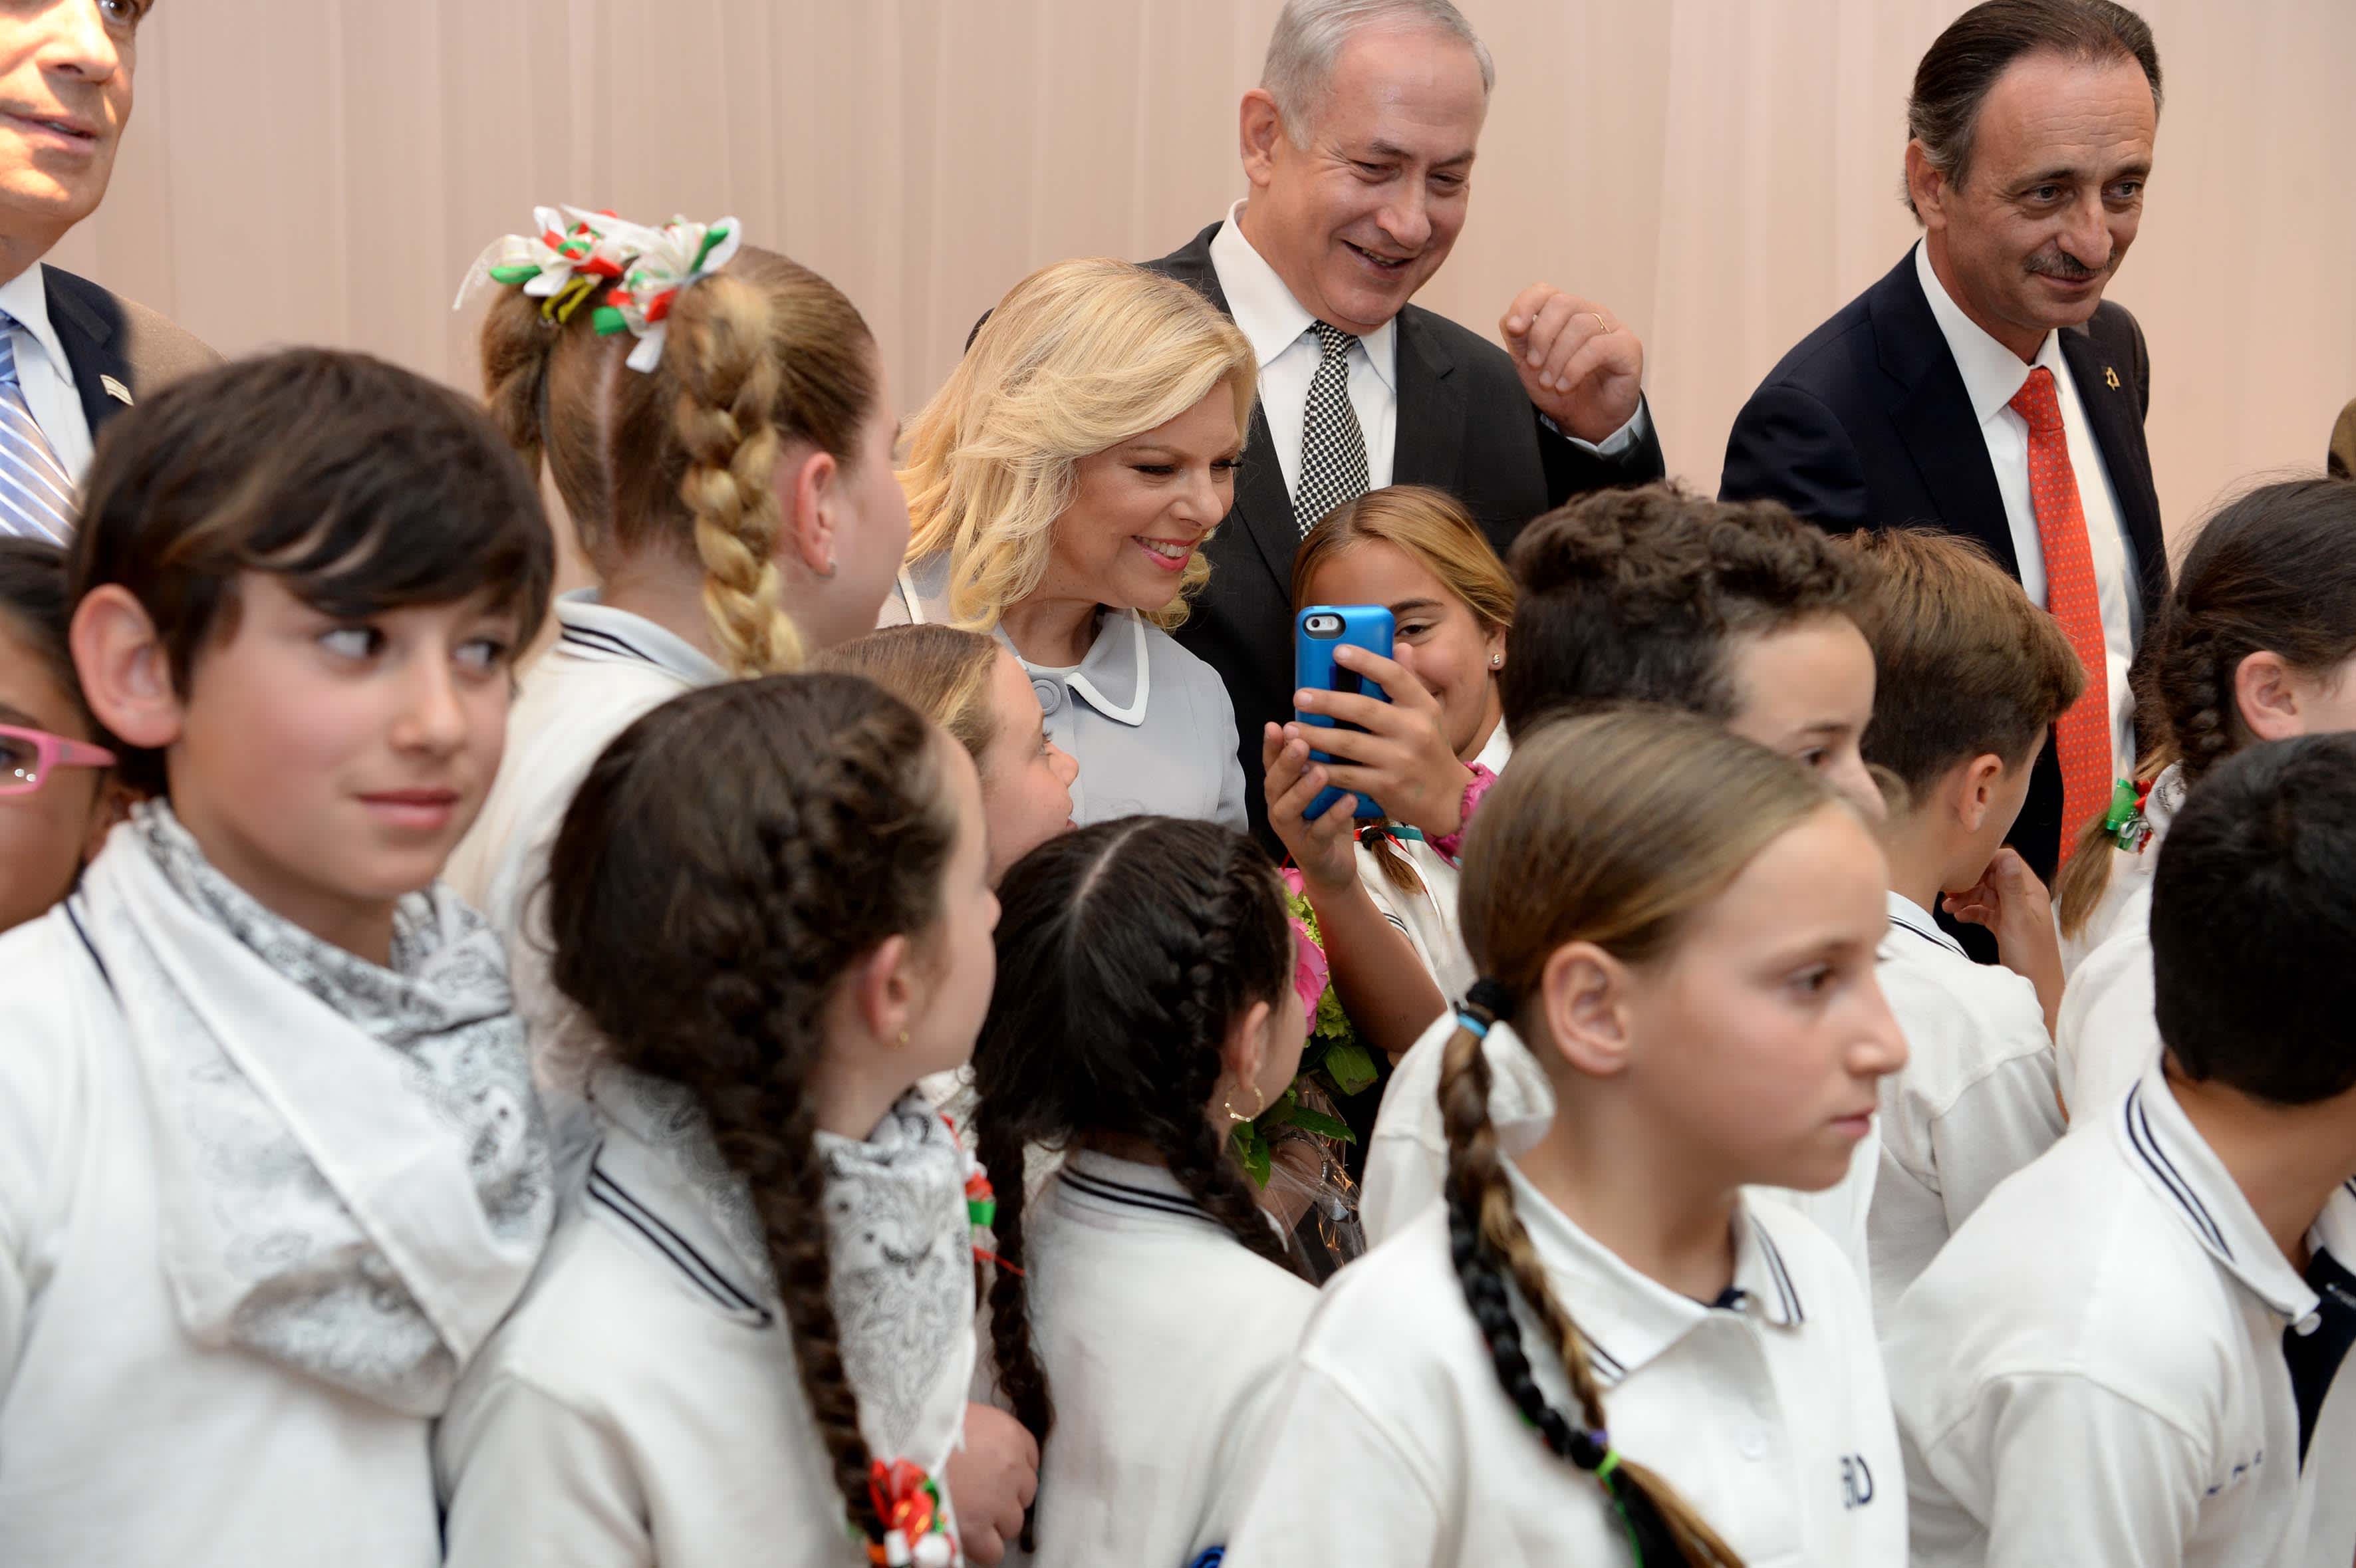 Prime Minister Benjamin Netanyahuand wfie Sara at an event for the Jewish community in Mexico City, September 14, 2017. AVI OHAYON - GPO